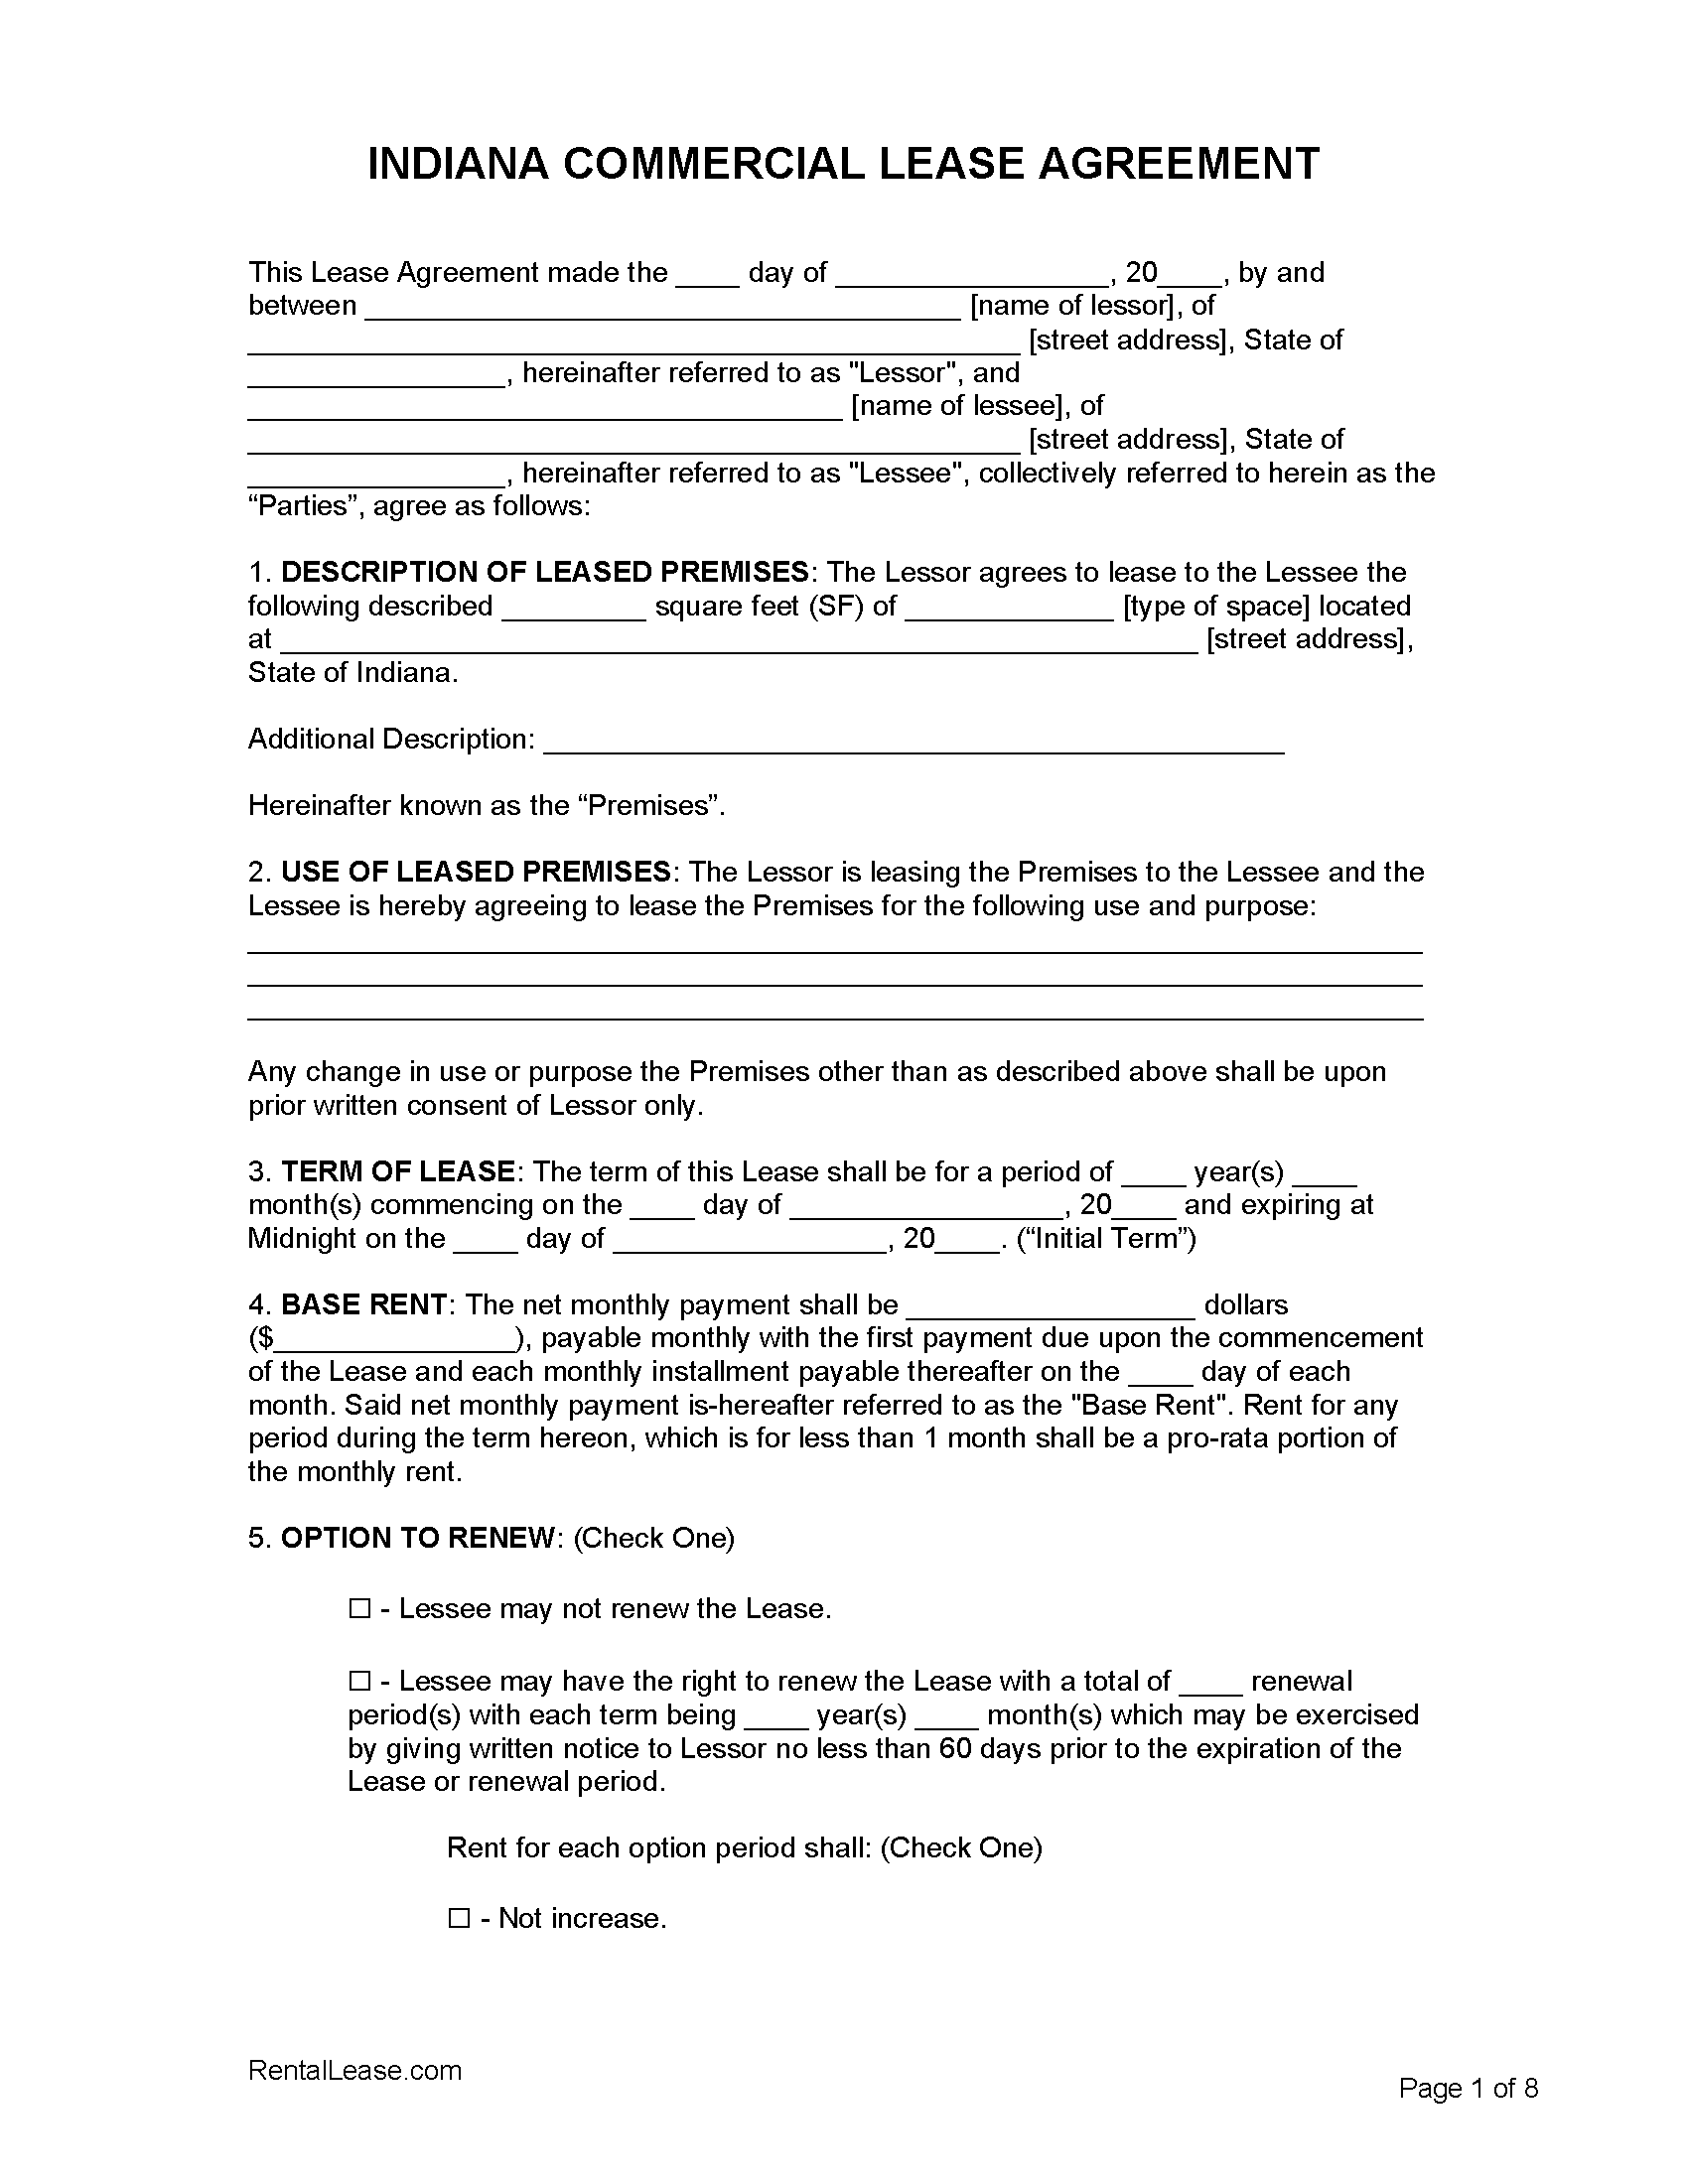 indiana-lease-agreement-template